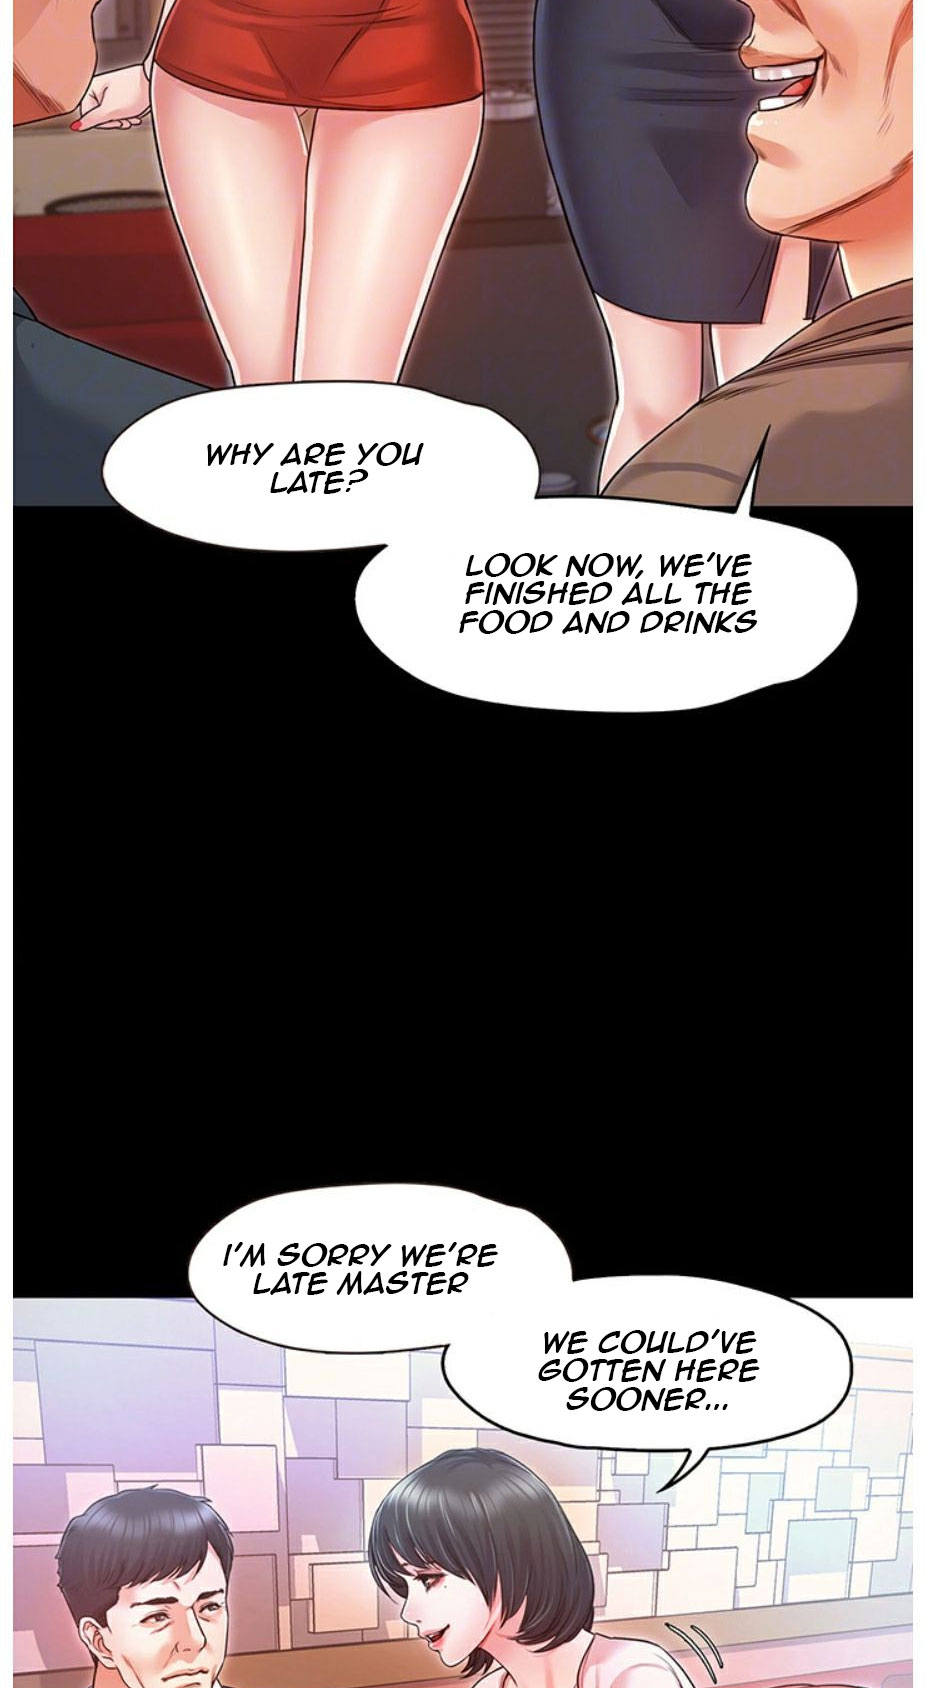 Who Did You Do With? - Chapter 5 Page 14